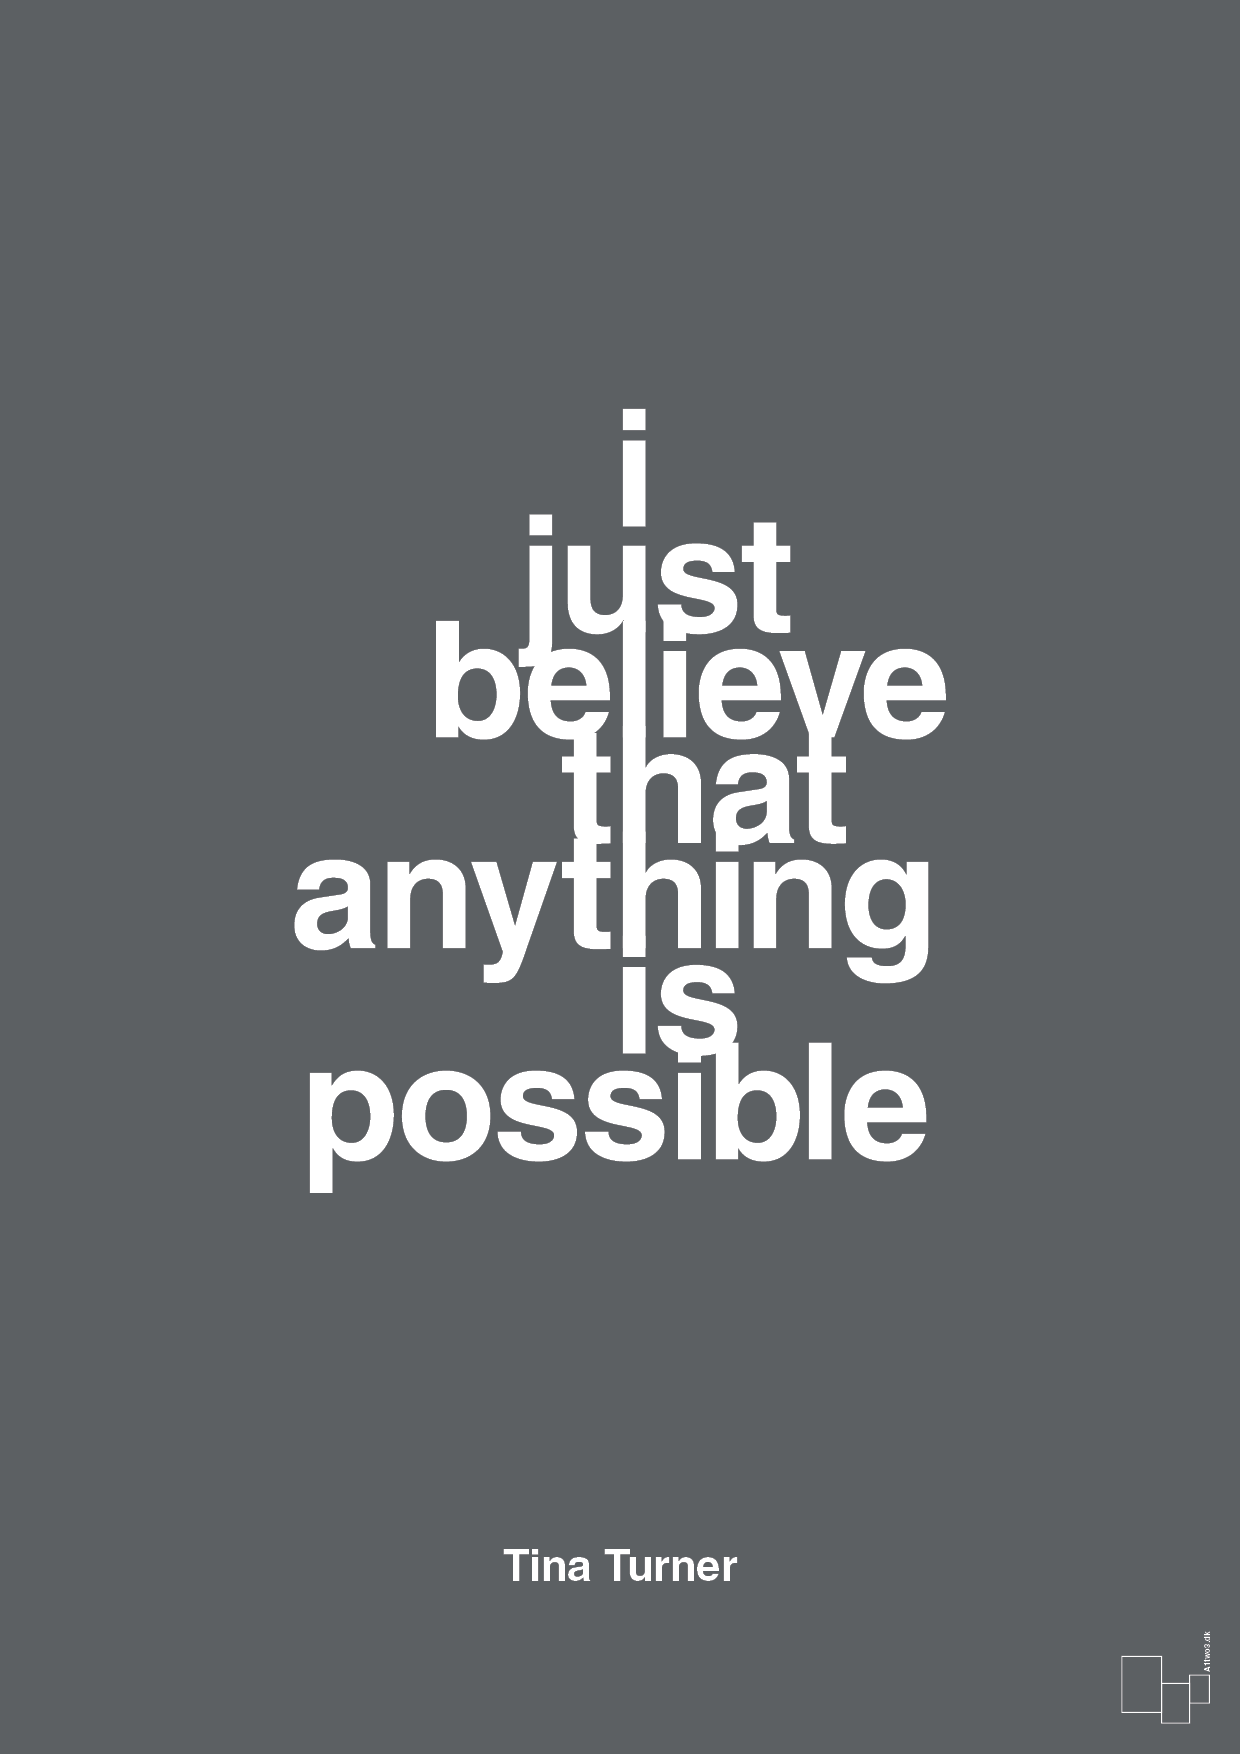 i just believe that anything is possible - Plakat med Citater i Graphic Charcoal